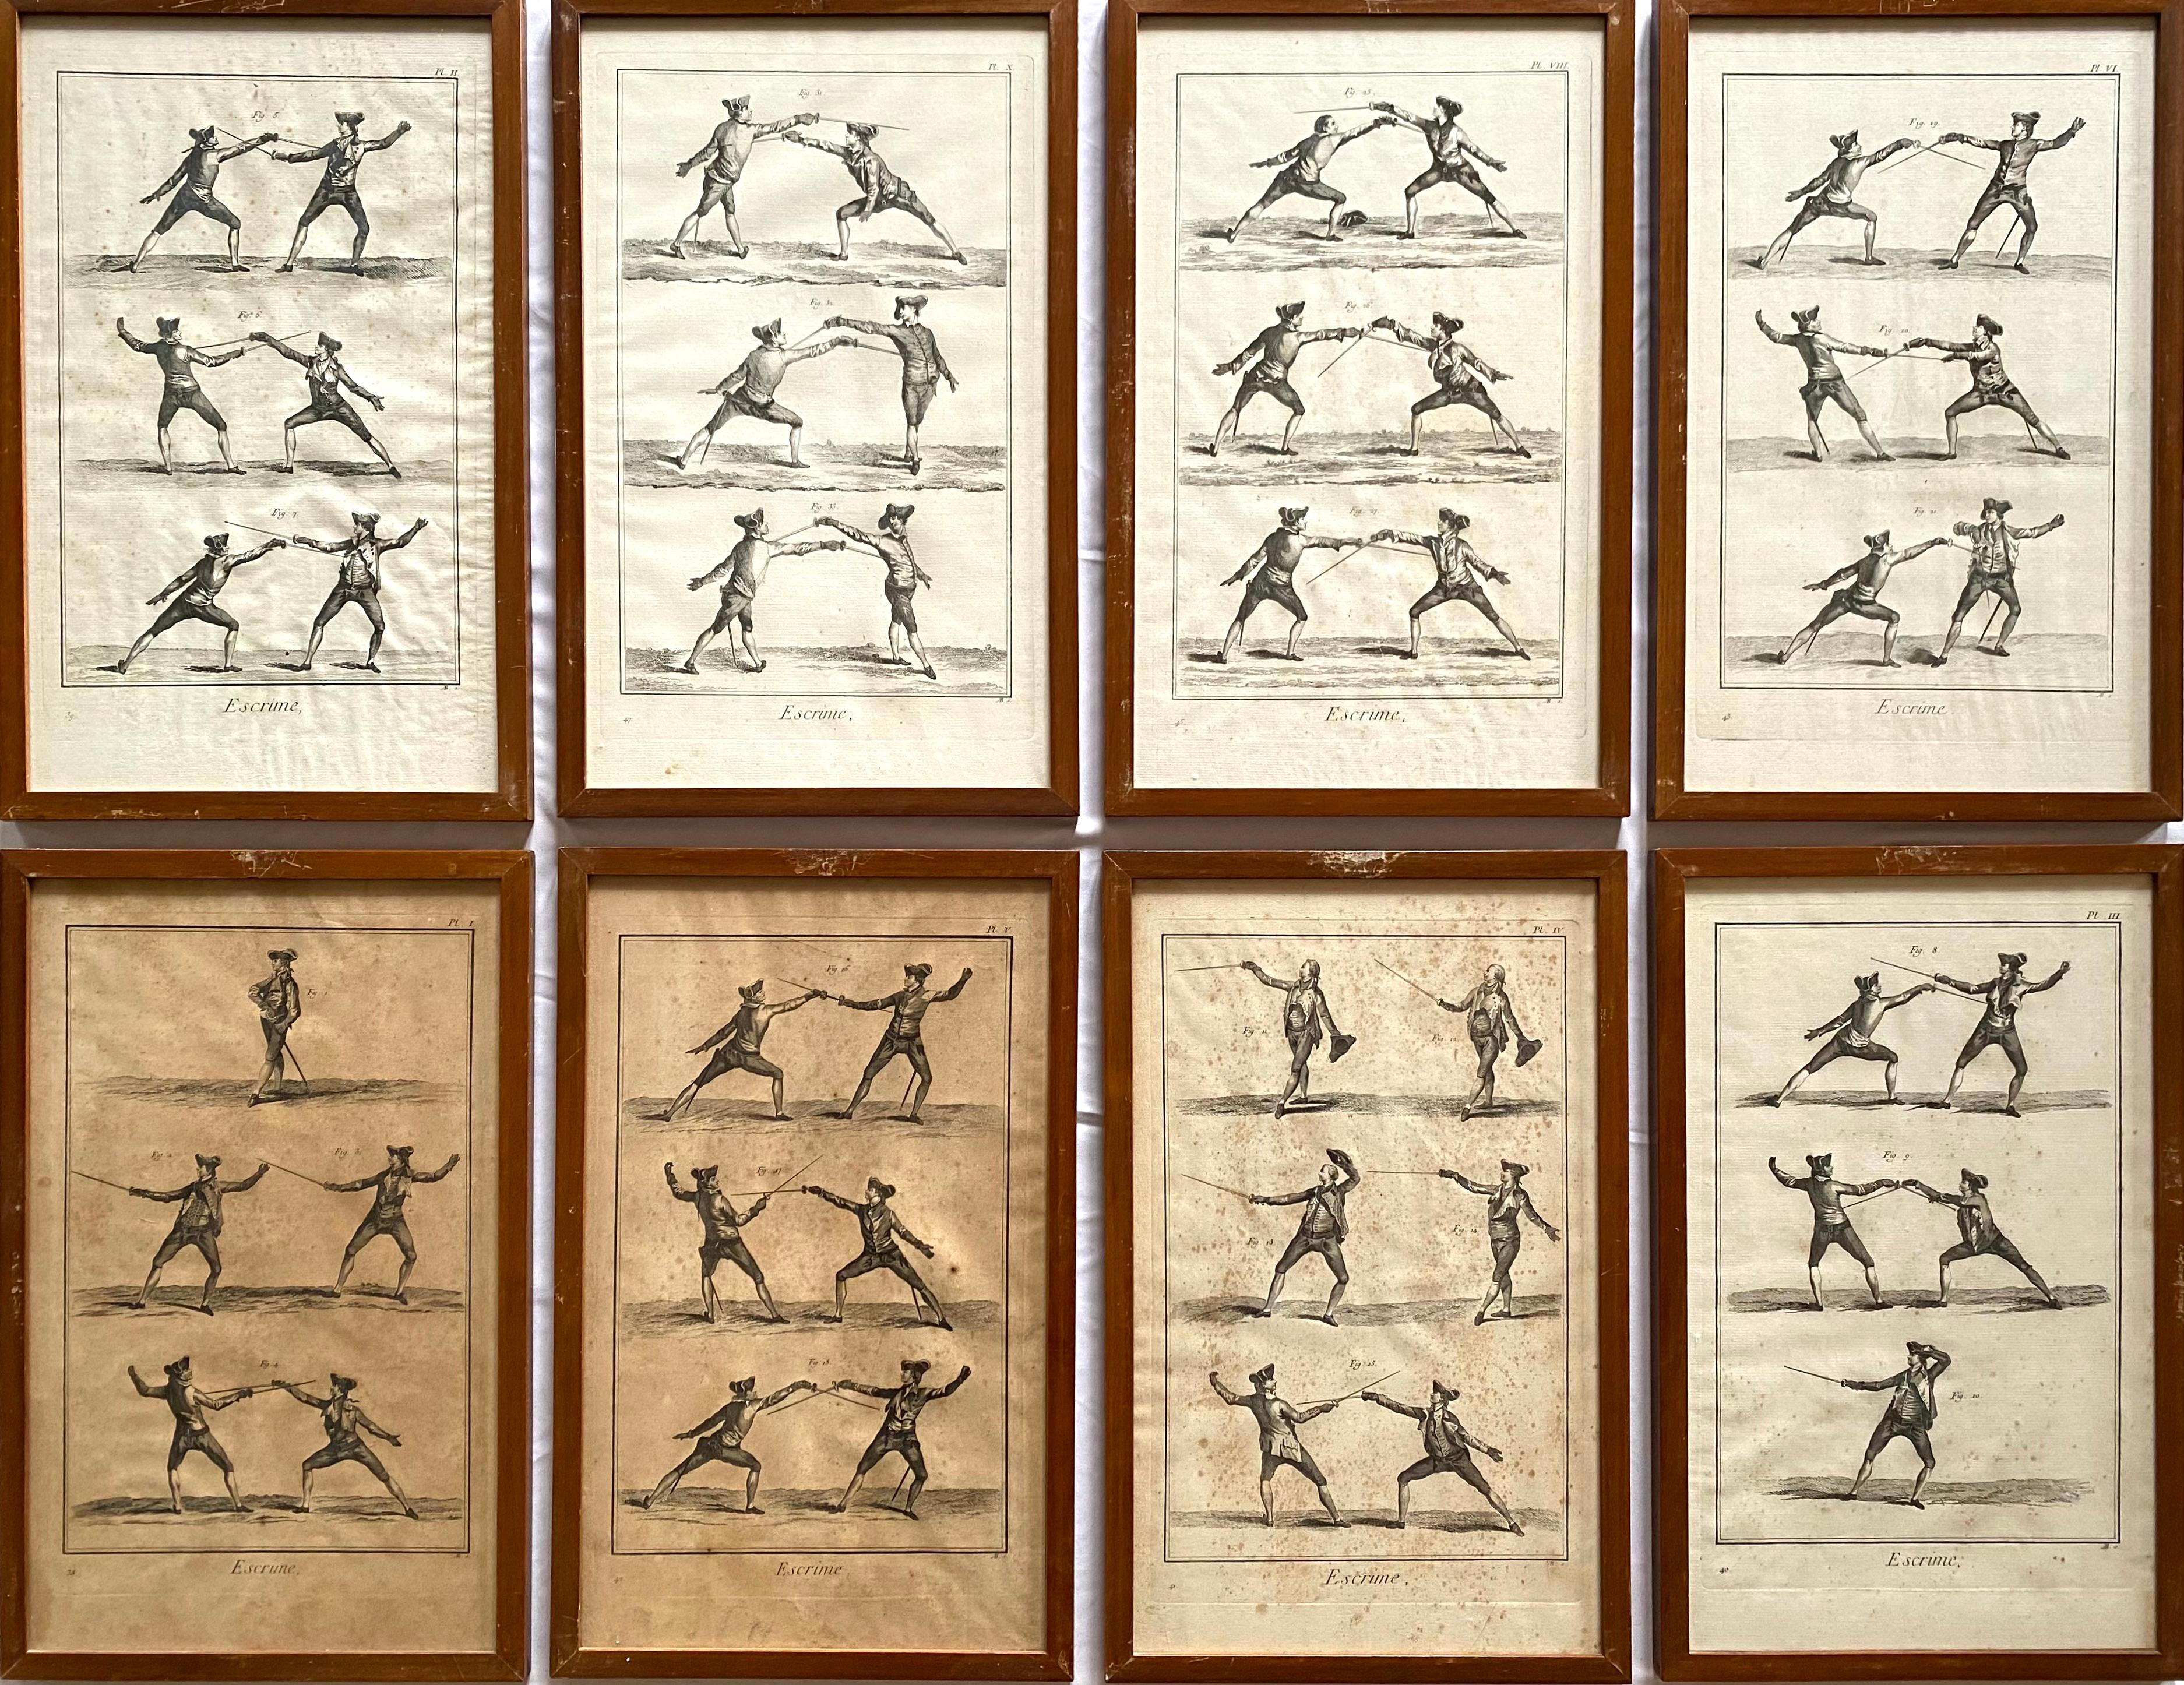 Set of 8 framed prints showing various fencing positions displayed by one or two men with rapiers or foils.

Wooden frame.

These engravings originate from the plate volume titled: ‘Recueil de Planches, sur les Sciences, les Arts Liberaux, et